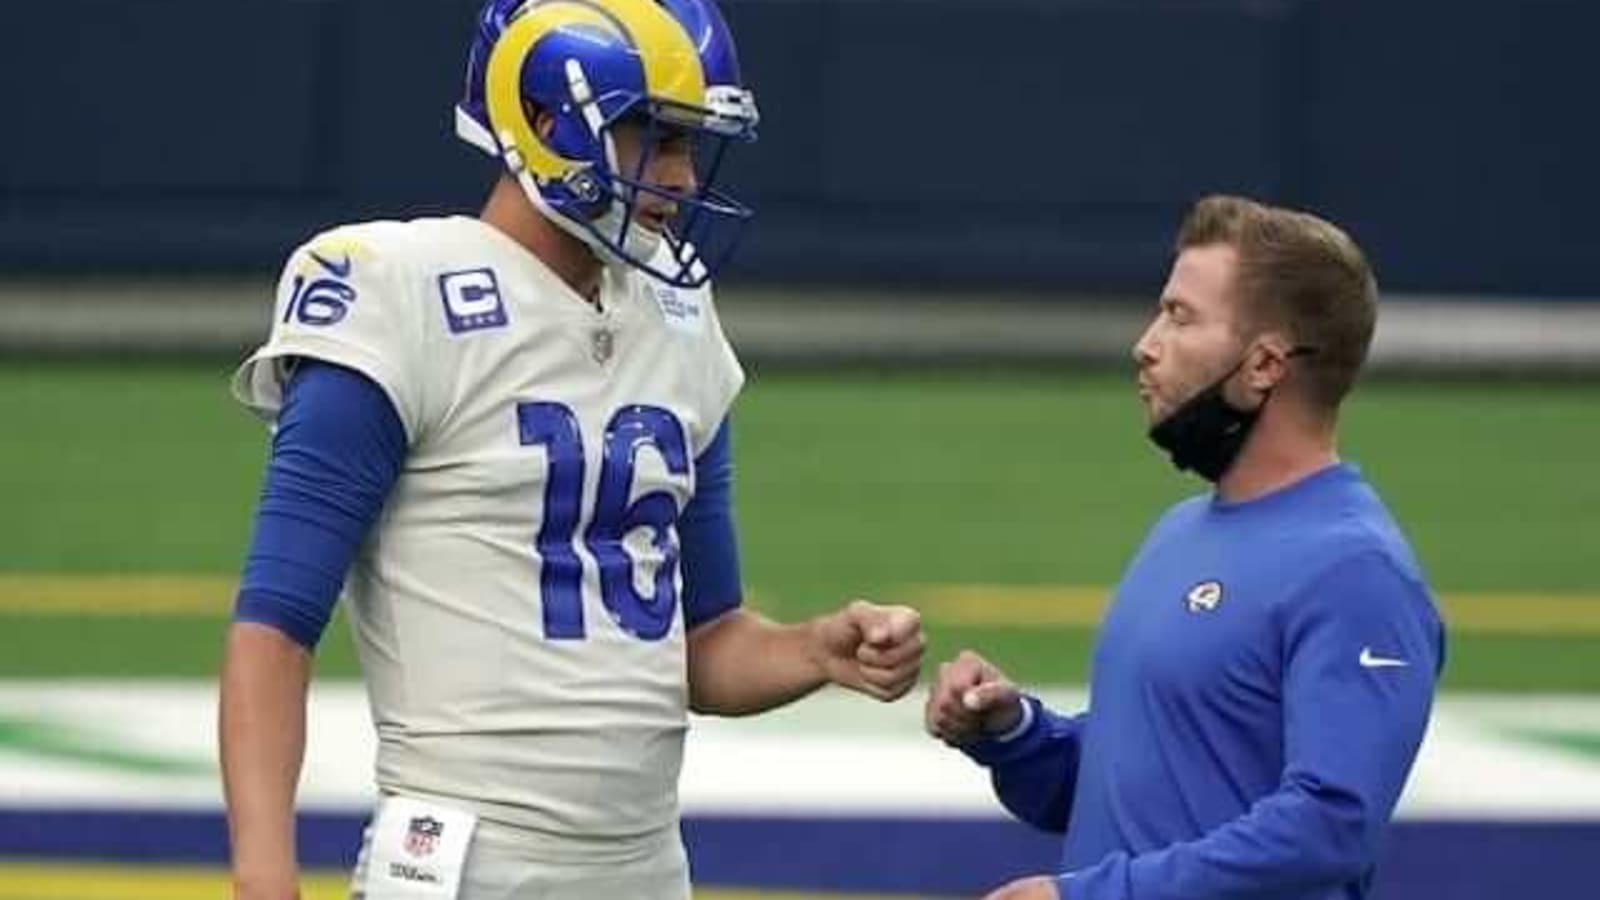  Sean McVay Praises Jared Goff For Maturing During Time With Lions